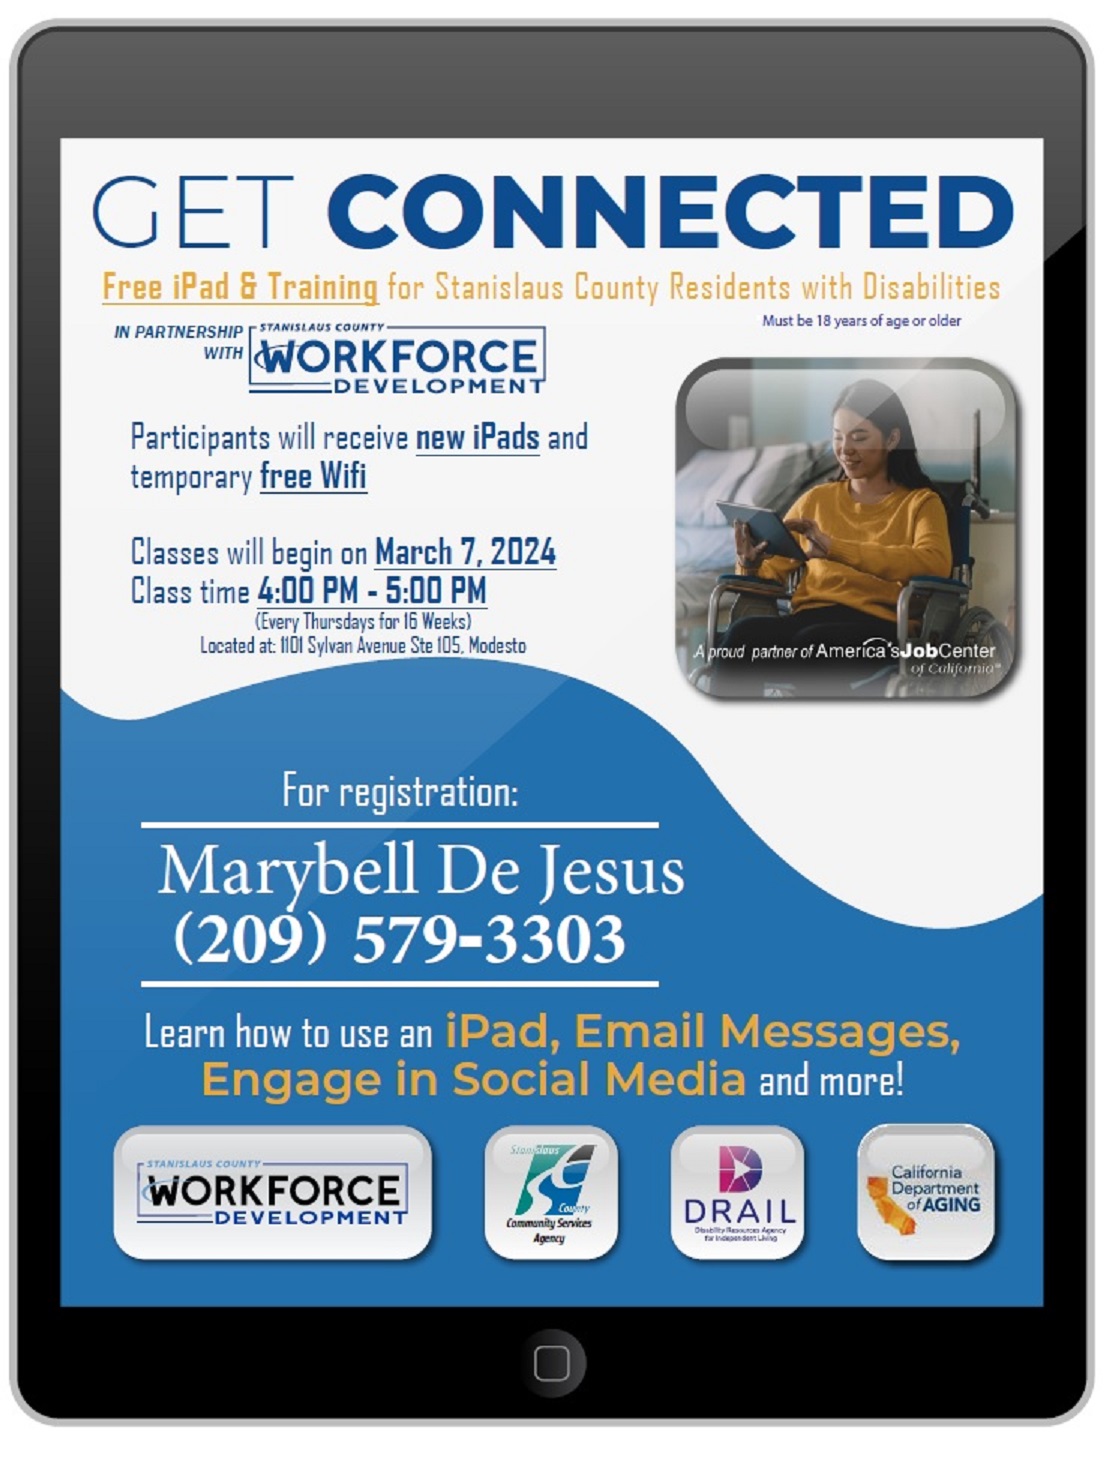 The image is a digital flyer with a sleek, modern design presented on a tablet screen. The background is a gradient of blue shades, and the top of the flyer reads 